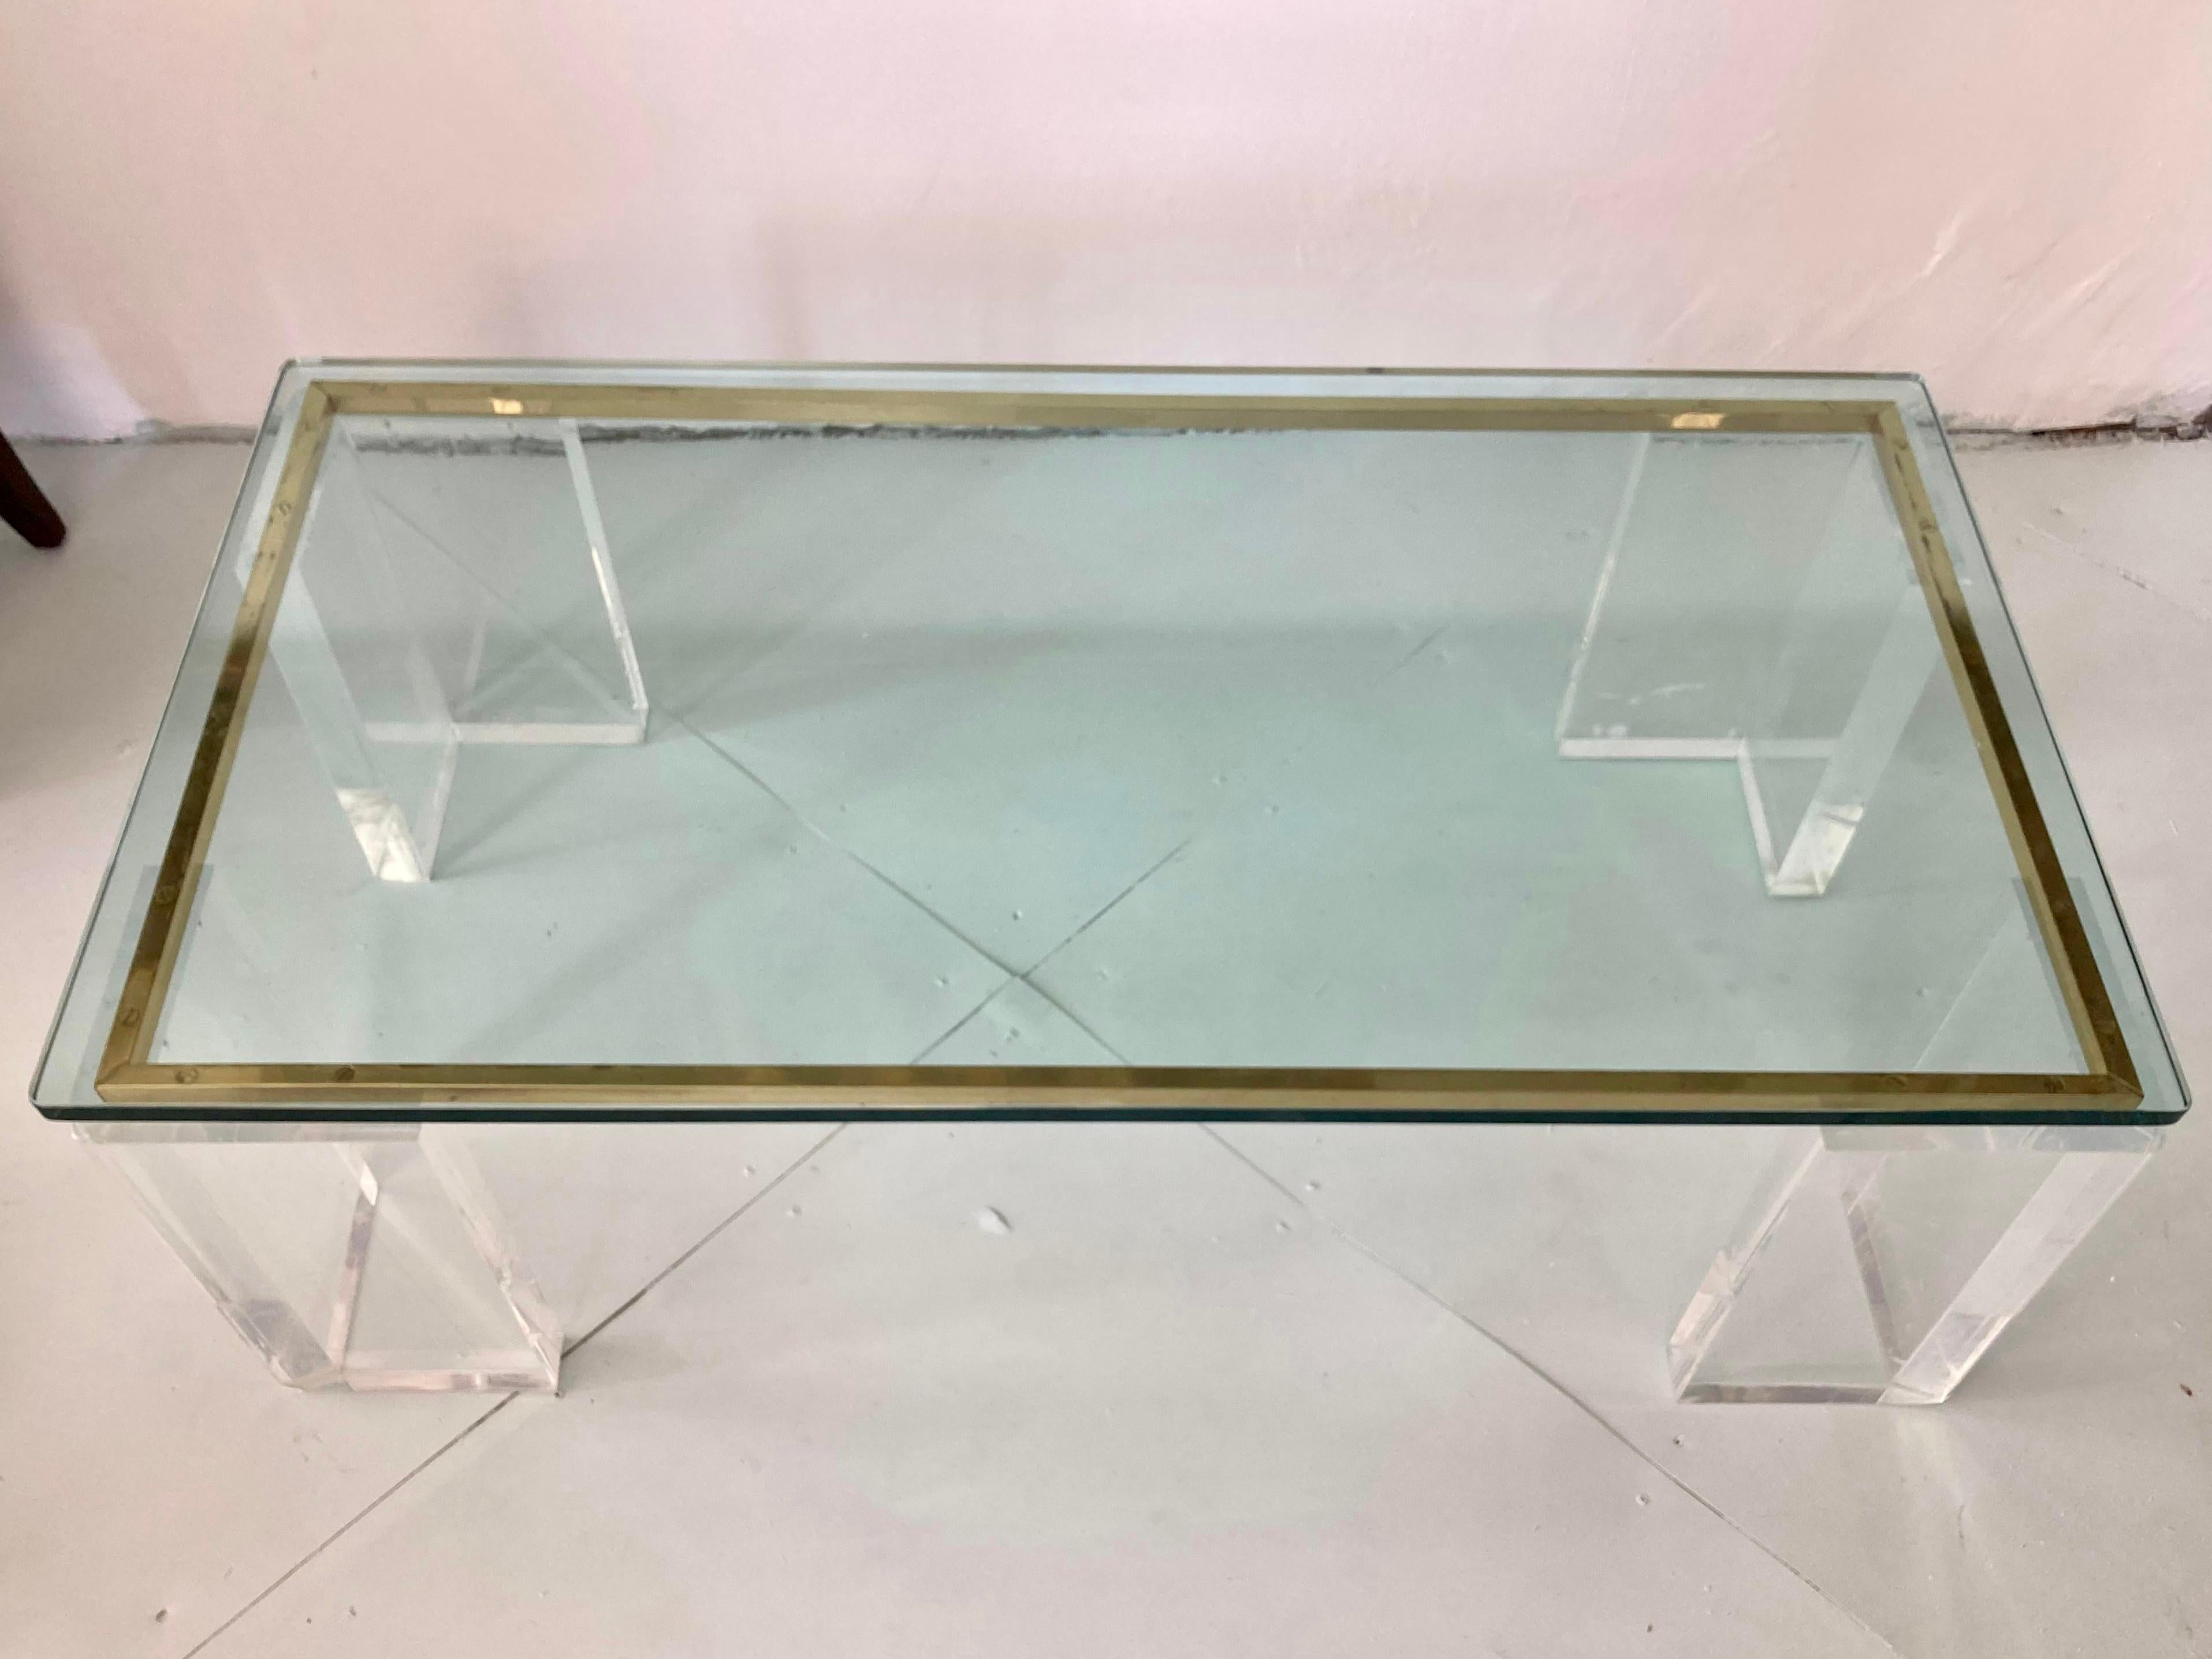 Fabulous modern Charles Hollis Jones lucite rectangular coffee table. Wonderful thick lucite with Brass metal details. Great addition to your modern inspired interiors. This item is not marked or signed by the designer or original manufacturer.